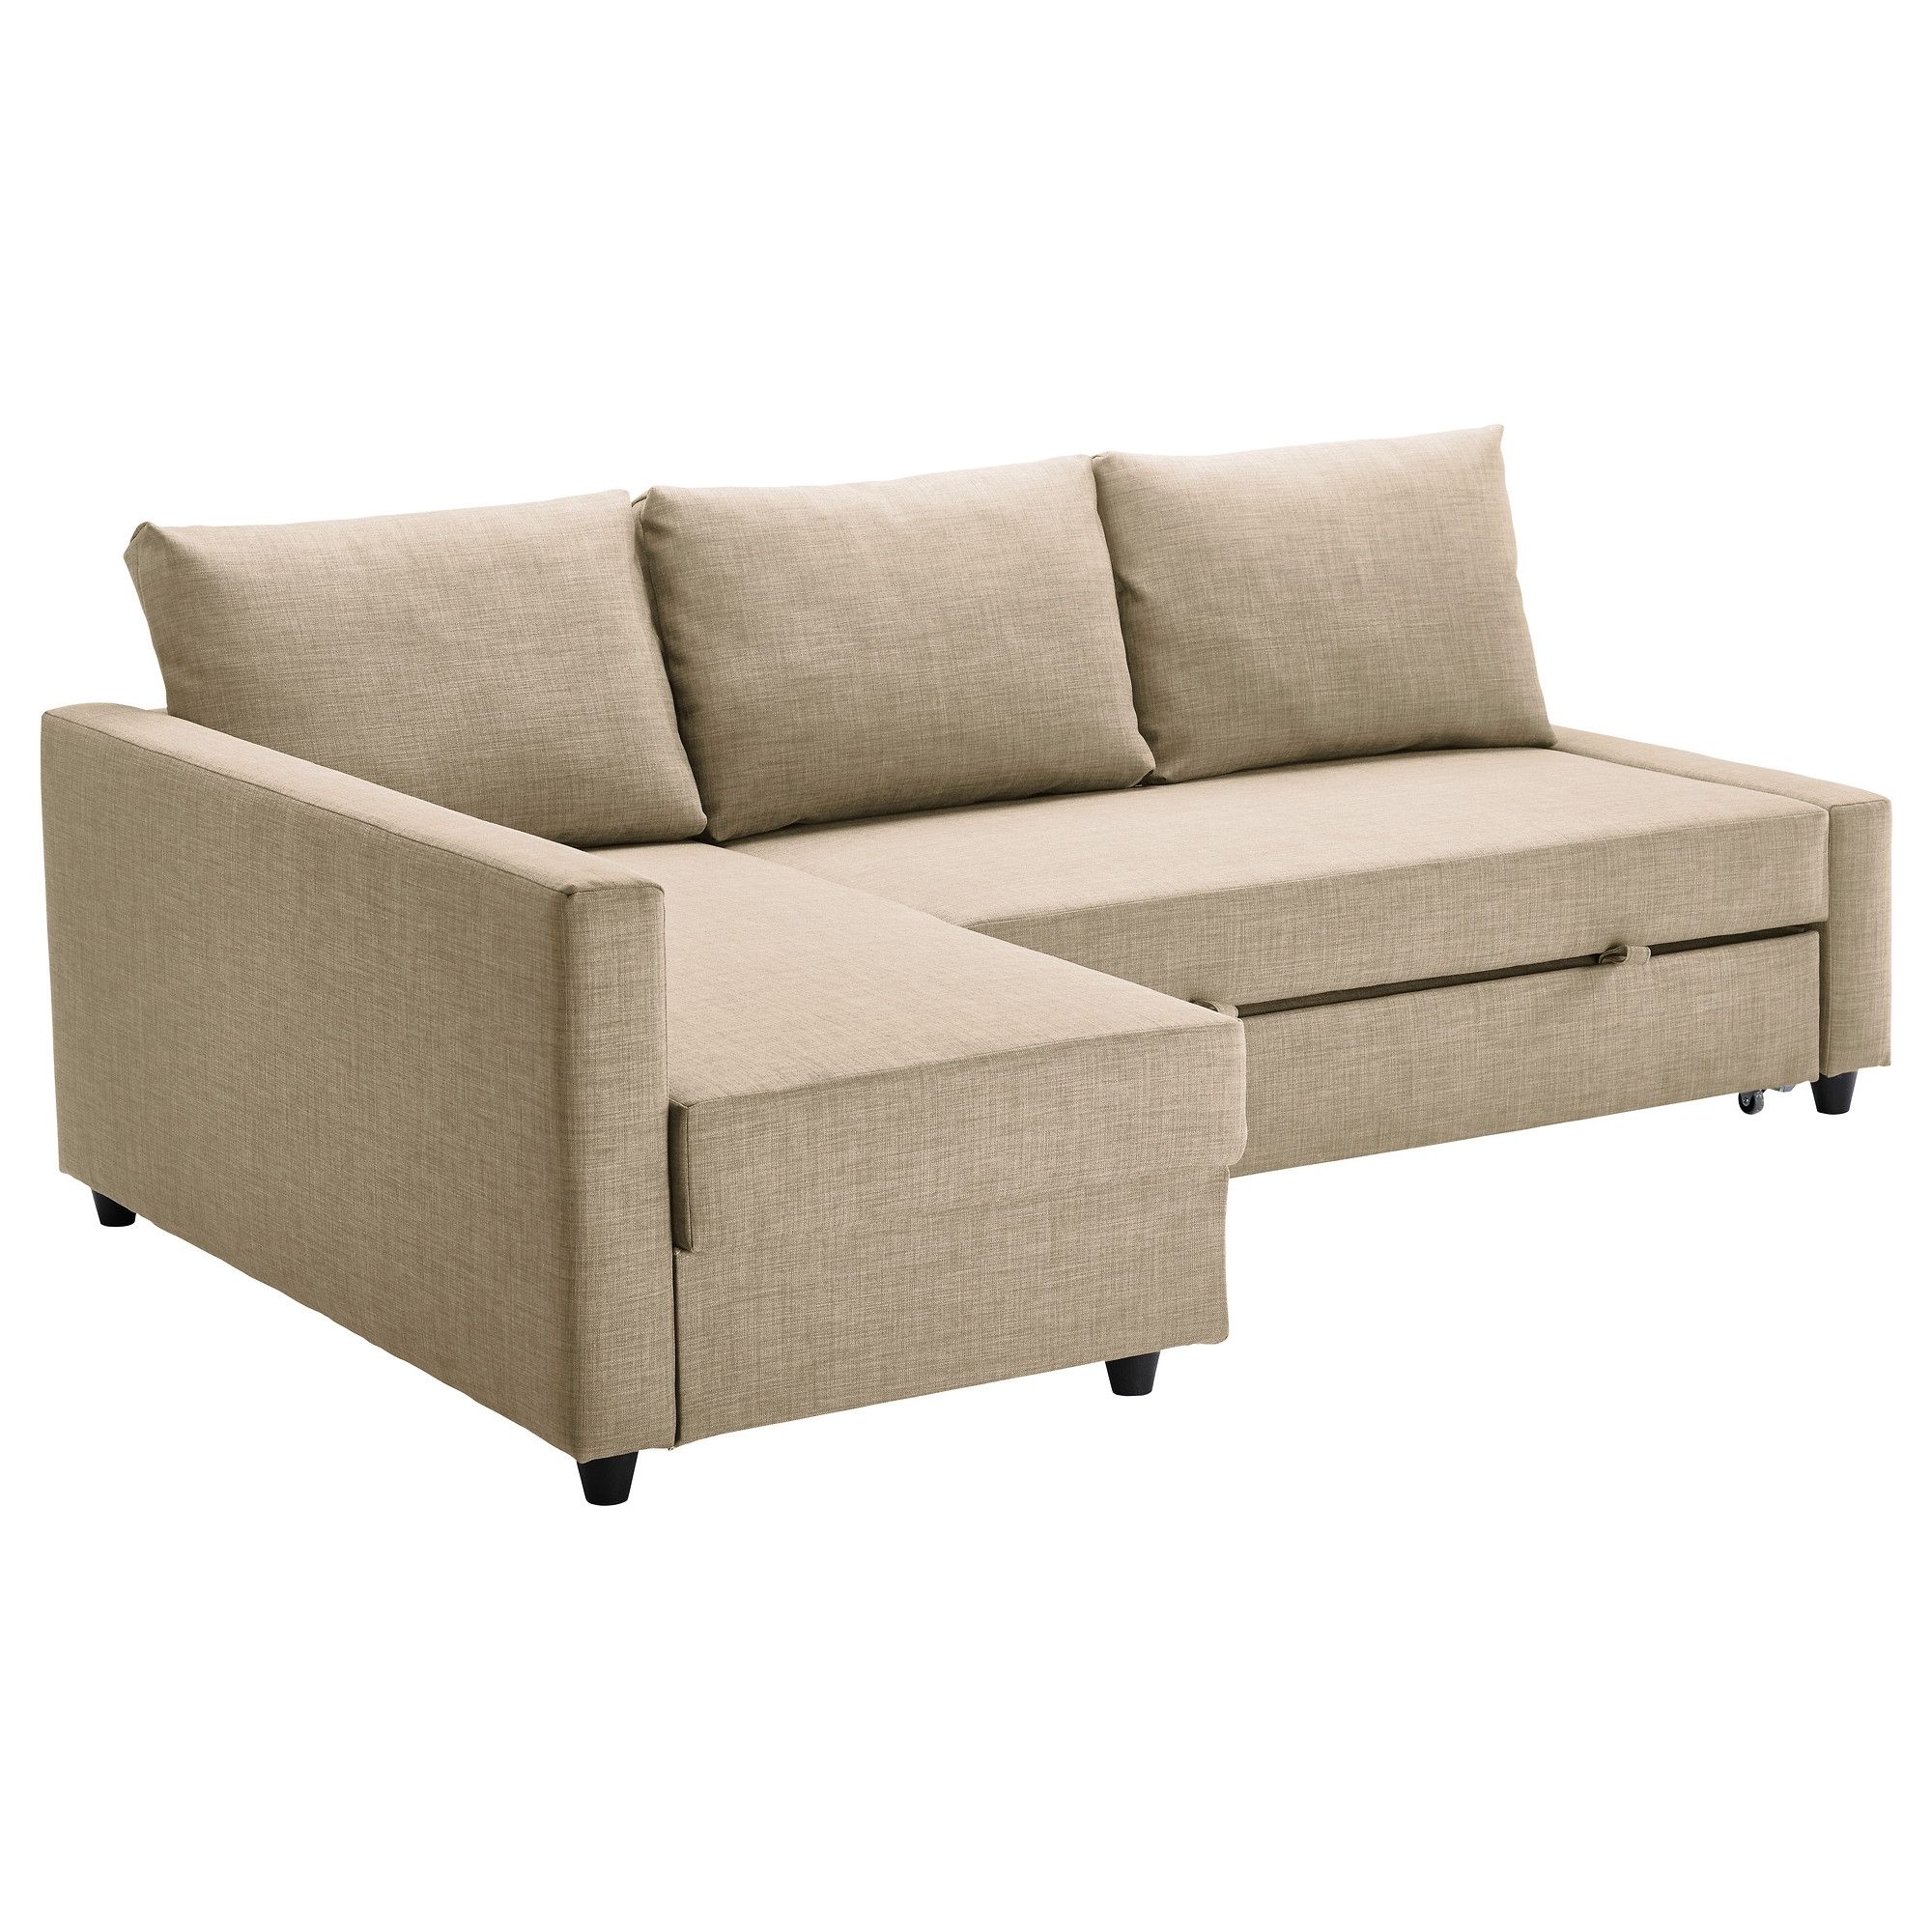 Most Up To Date Chaise Sleepers In Friheten Sleeper Sectional,3 Seat W/storage – Skiftebo Dark Gray (View 7 of 15)